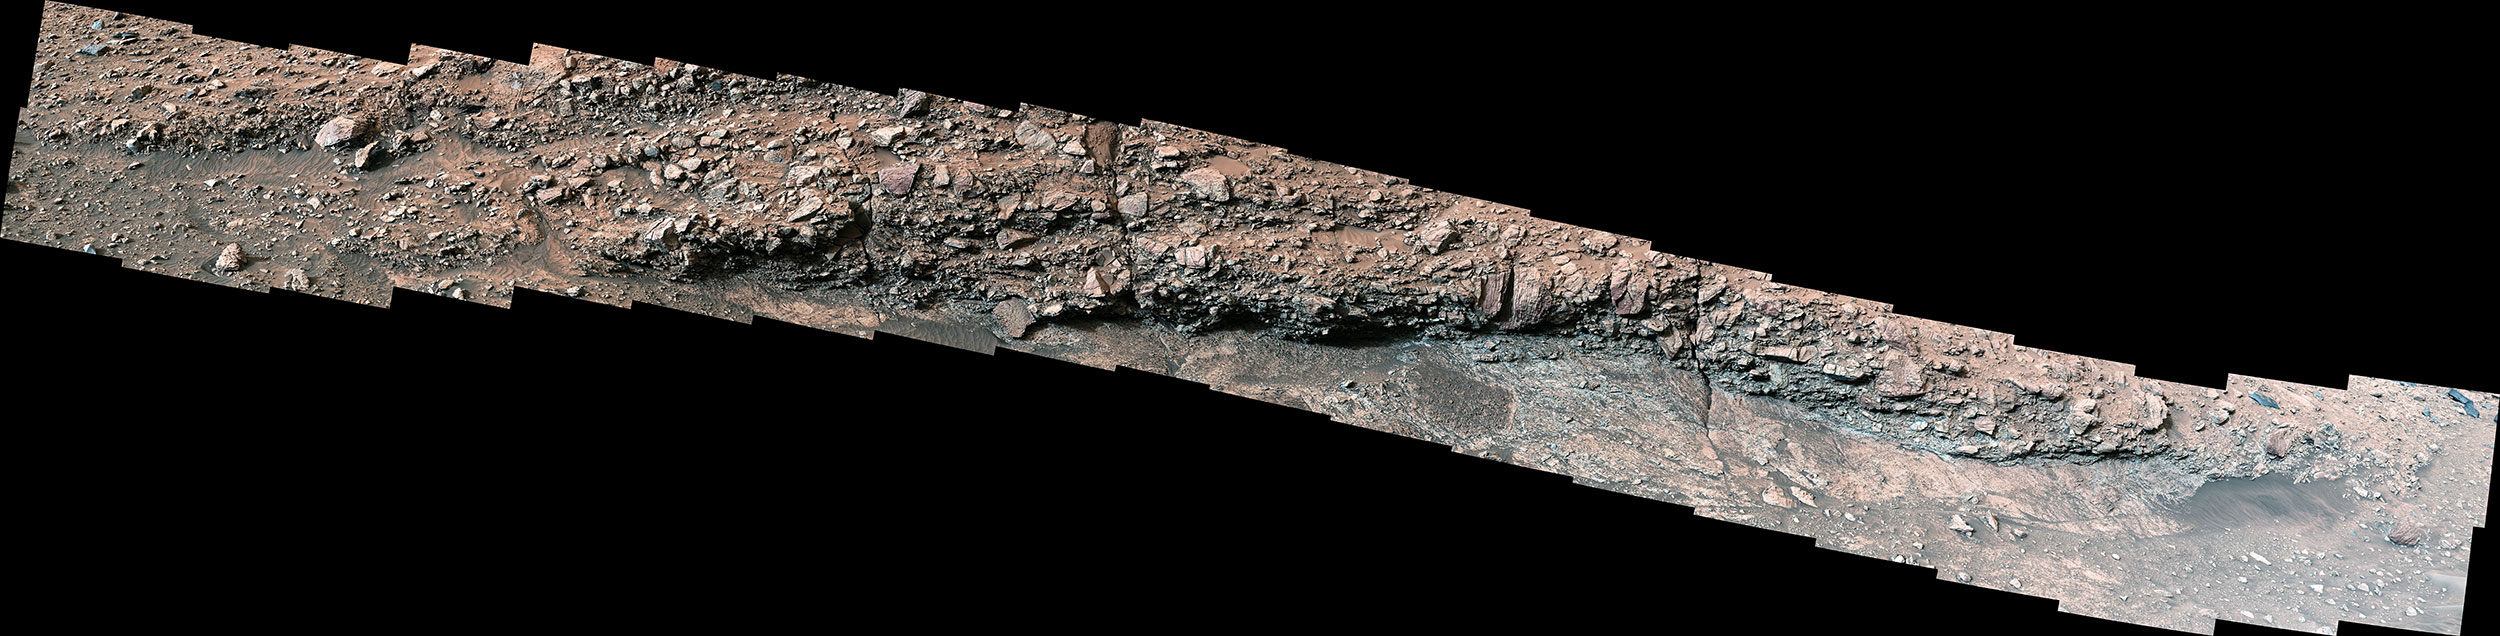 This panorama — captured by Curiosity’s Mast Camera, or Mastcam, on May 7, 2024, the 4,178th Martian day, or sol, of the mission — is made up of 40 individual images that were stitched together after being sent back to Earth. The color has been adjusted to match lighting conditions as the human eye would see them on Earth.